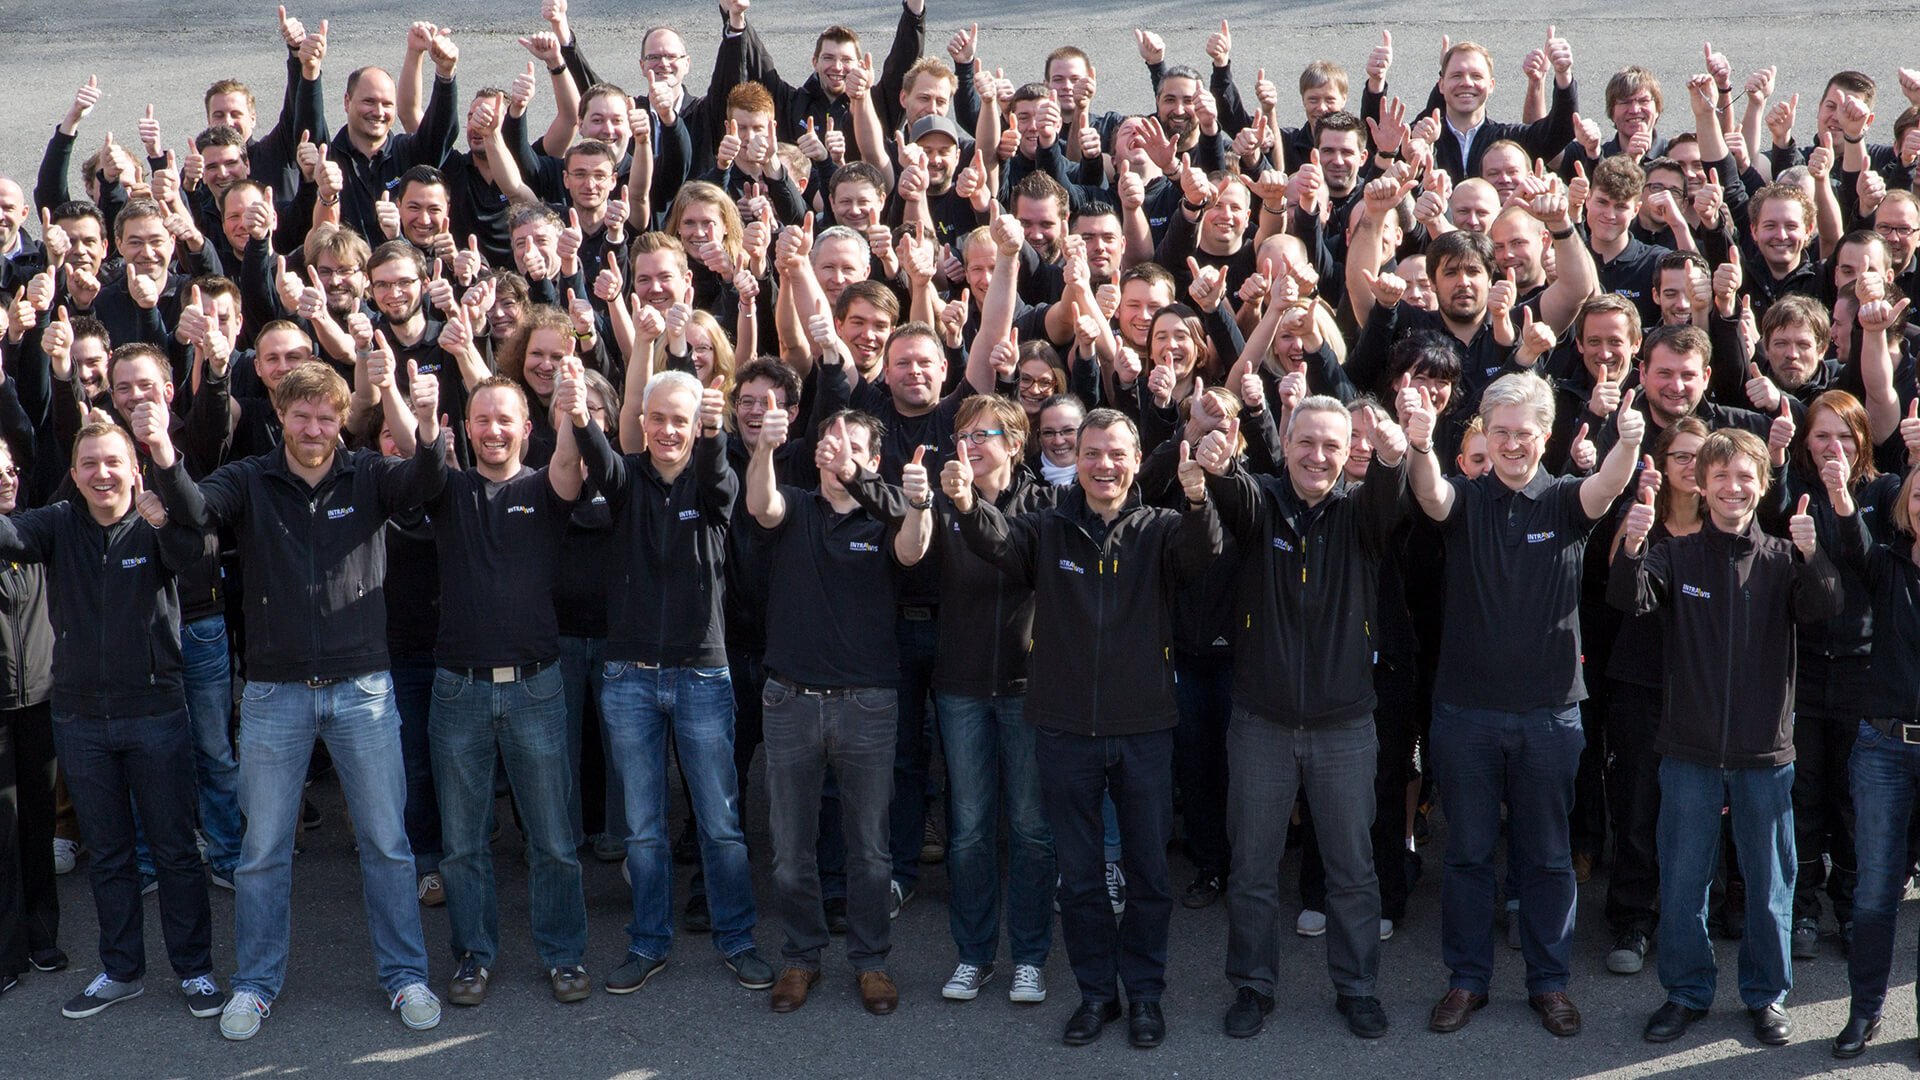 intrvis-employees-thumbs-up-group-1920x1080px